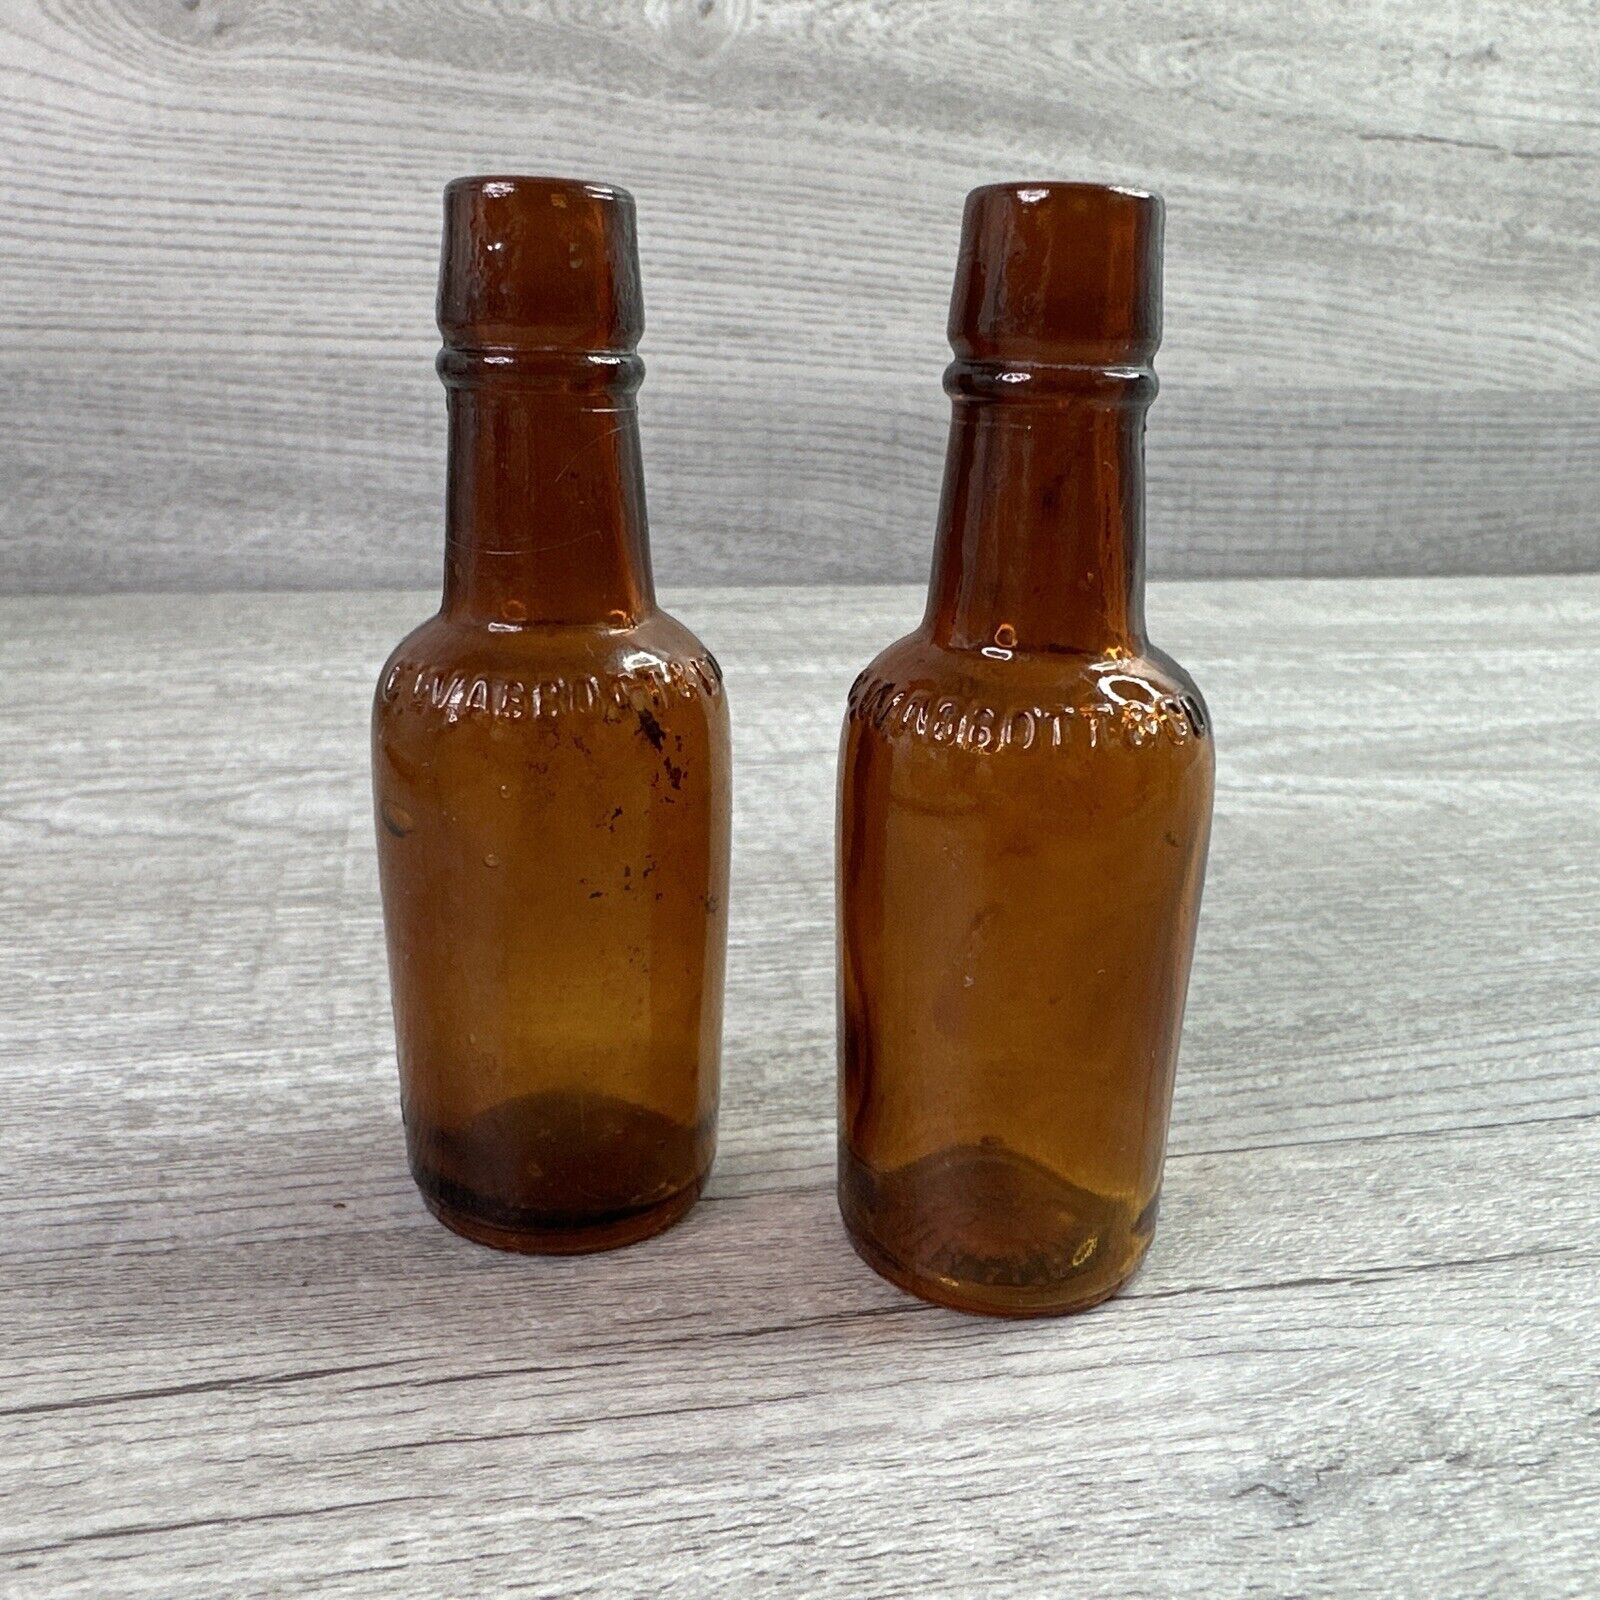 VTG Lot Of 2 Mini VICTORIAN BITTERS EMBOSSED,C W ABBOT & CO, BALTIMORE Amber